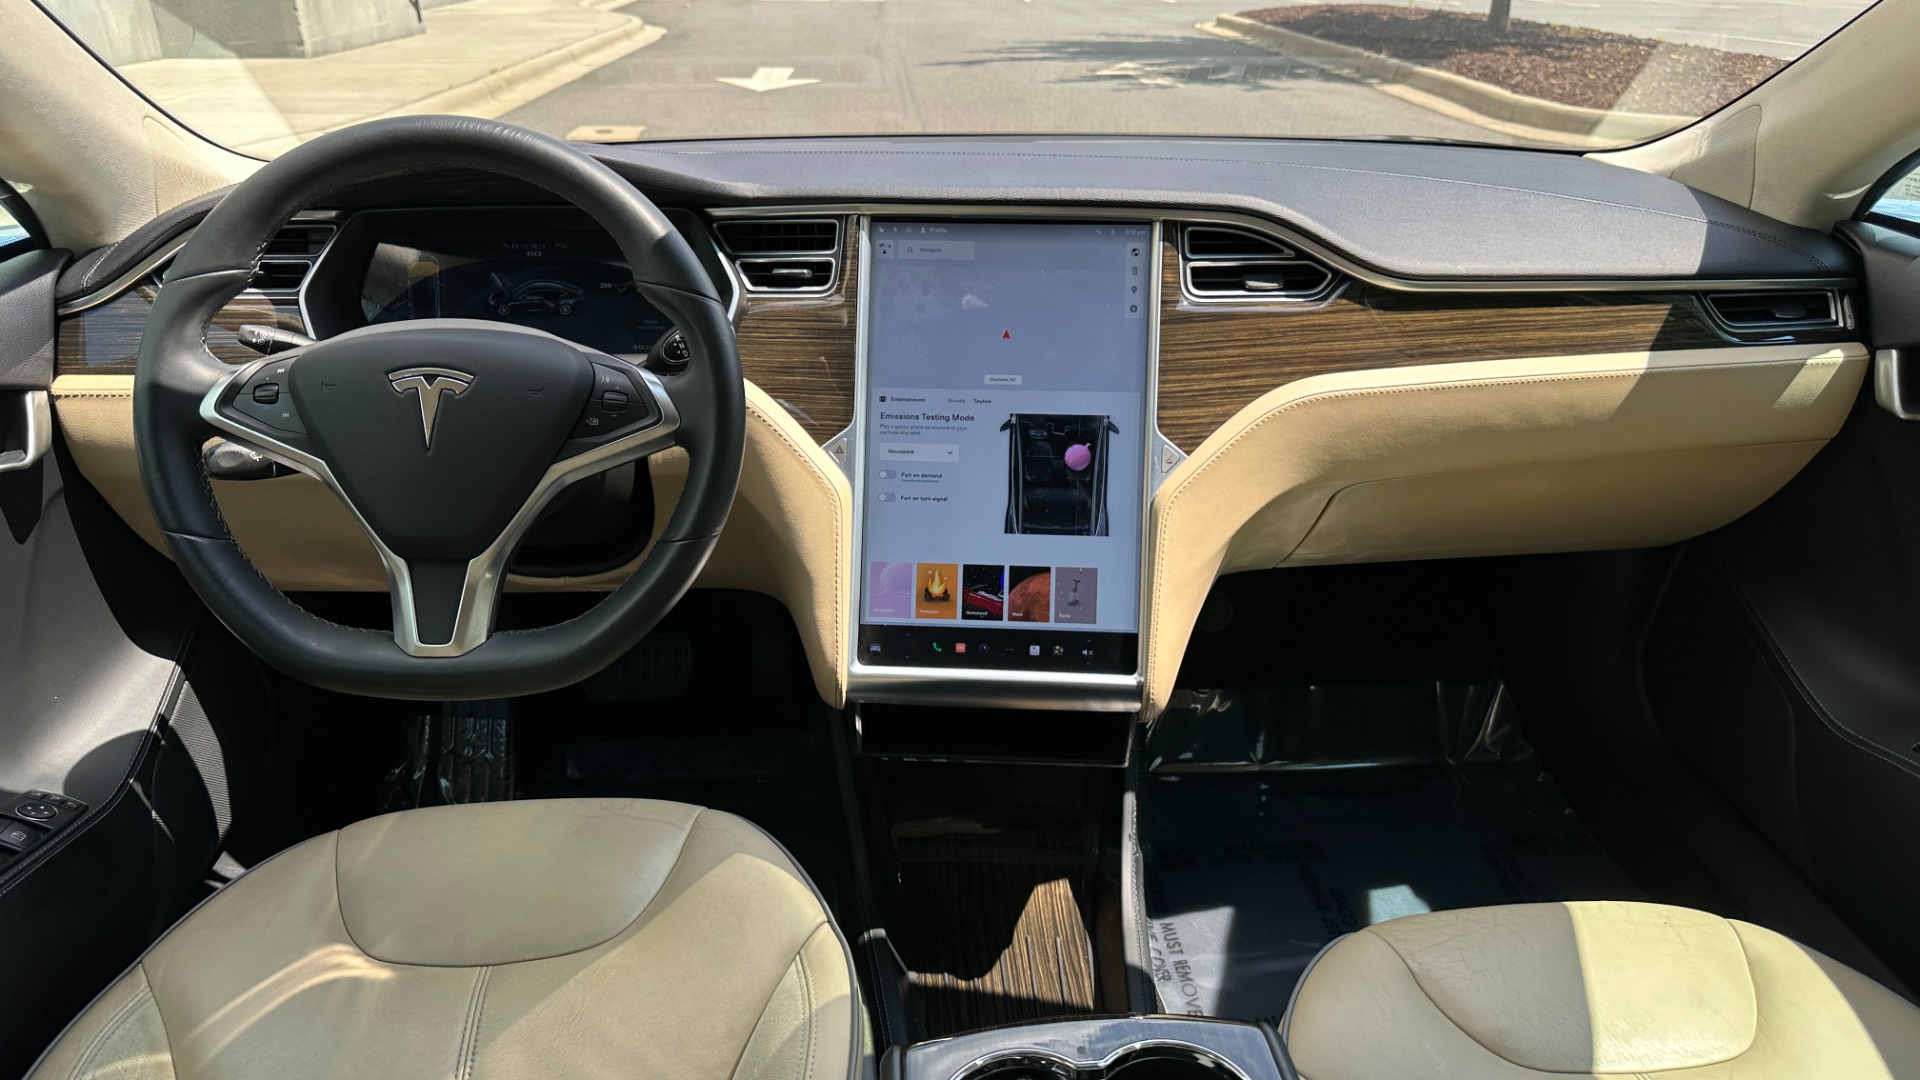 Used 2014 Tesla Model S 60 kWh Battery / 60D / PREMIUM CONNECTIVITY / LEATHER / SUNROOF for sale $22,995 at Formula Imports in Charlotte NC 28227 27